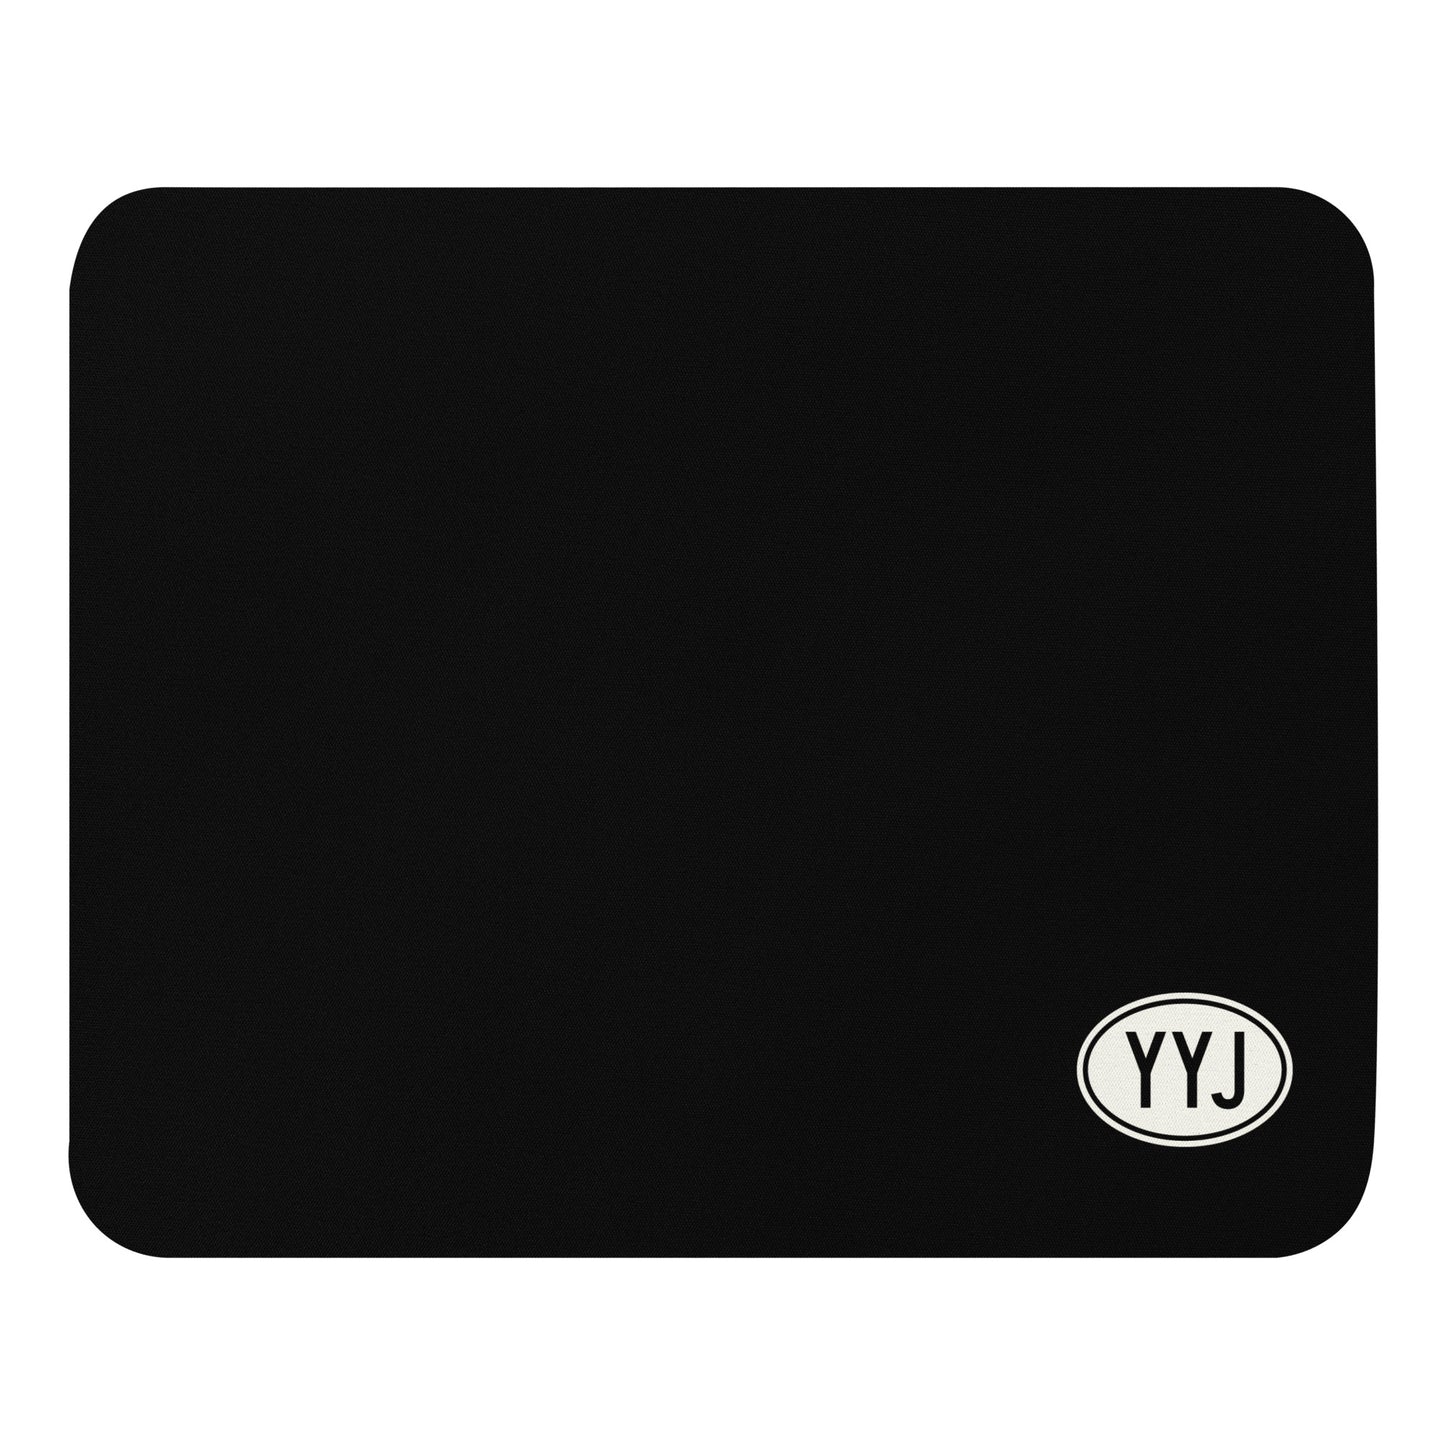 Unique Travel Gift Mouse Pad - White Oval • YYJ Victoria • YHM Designs - Image 01